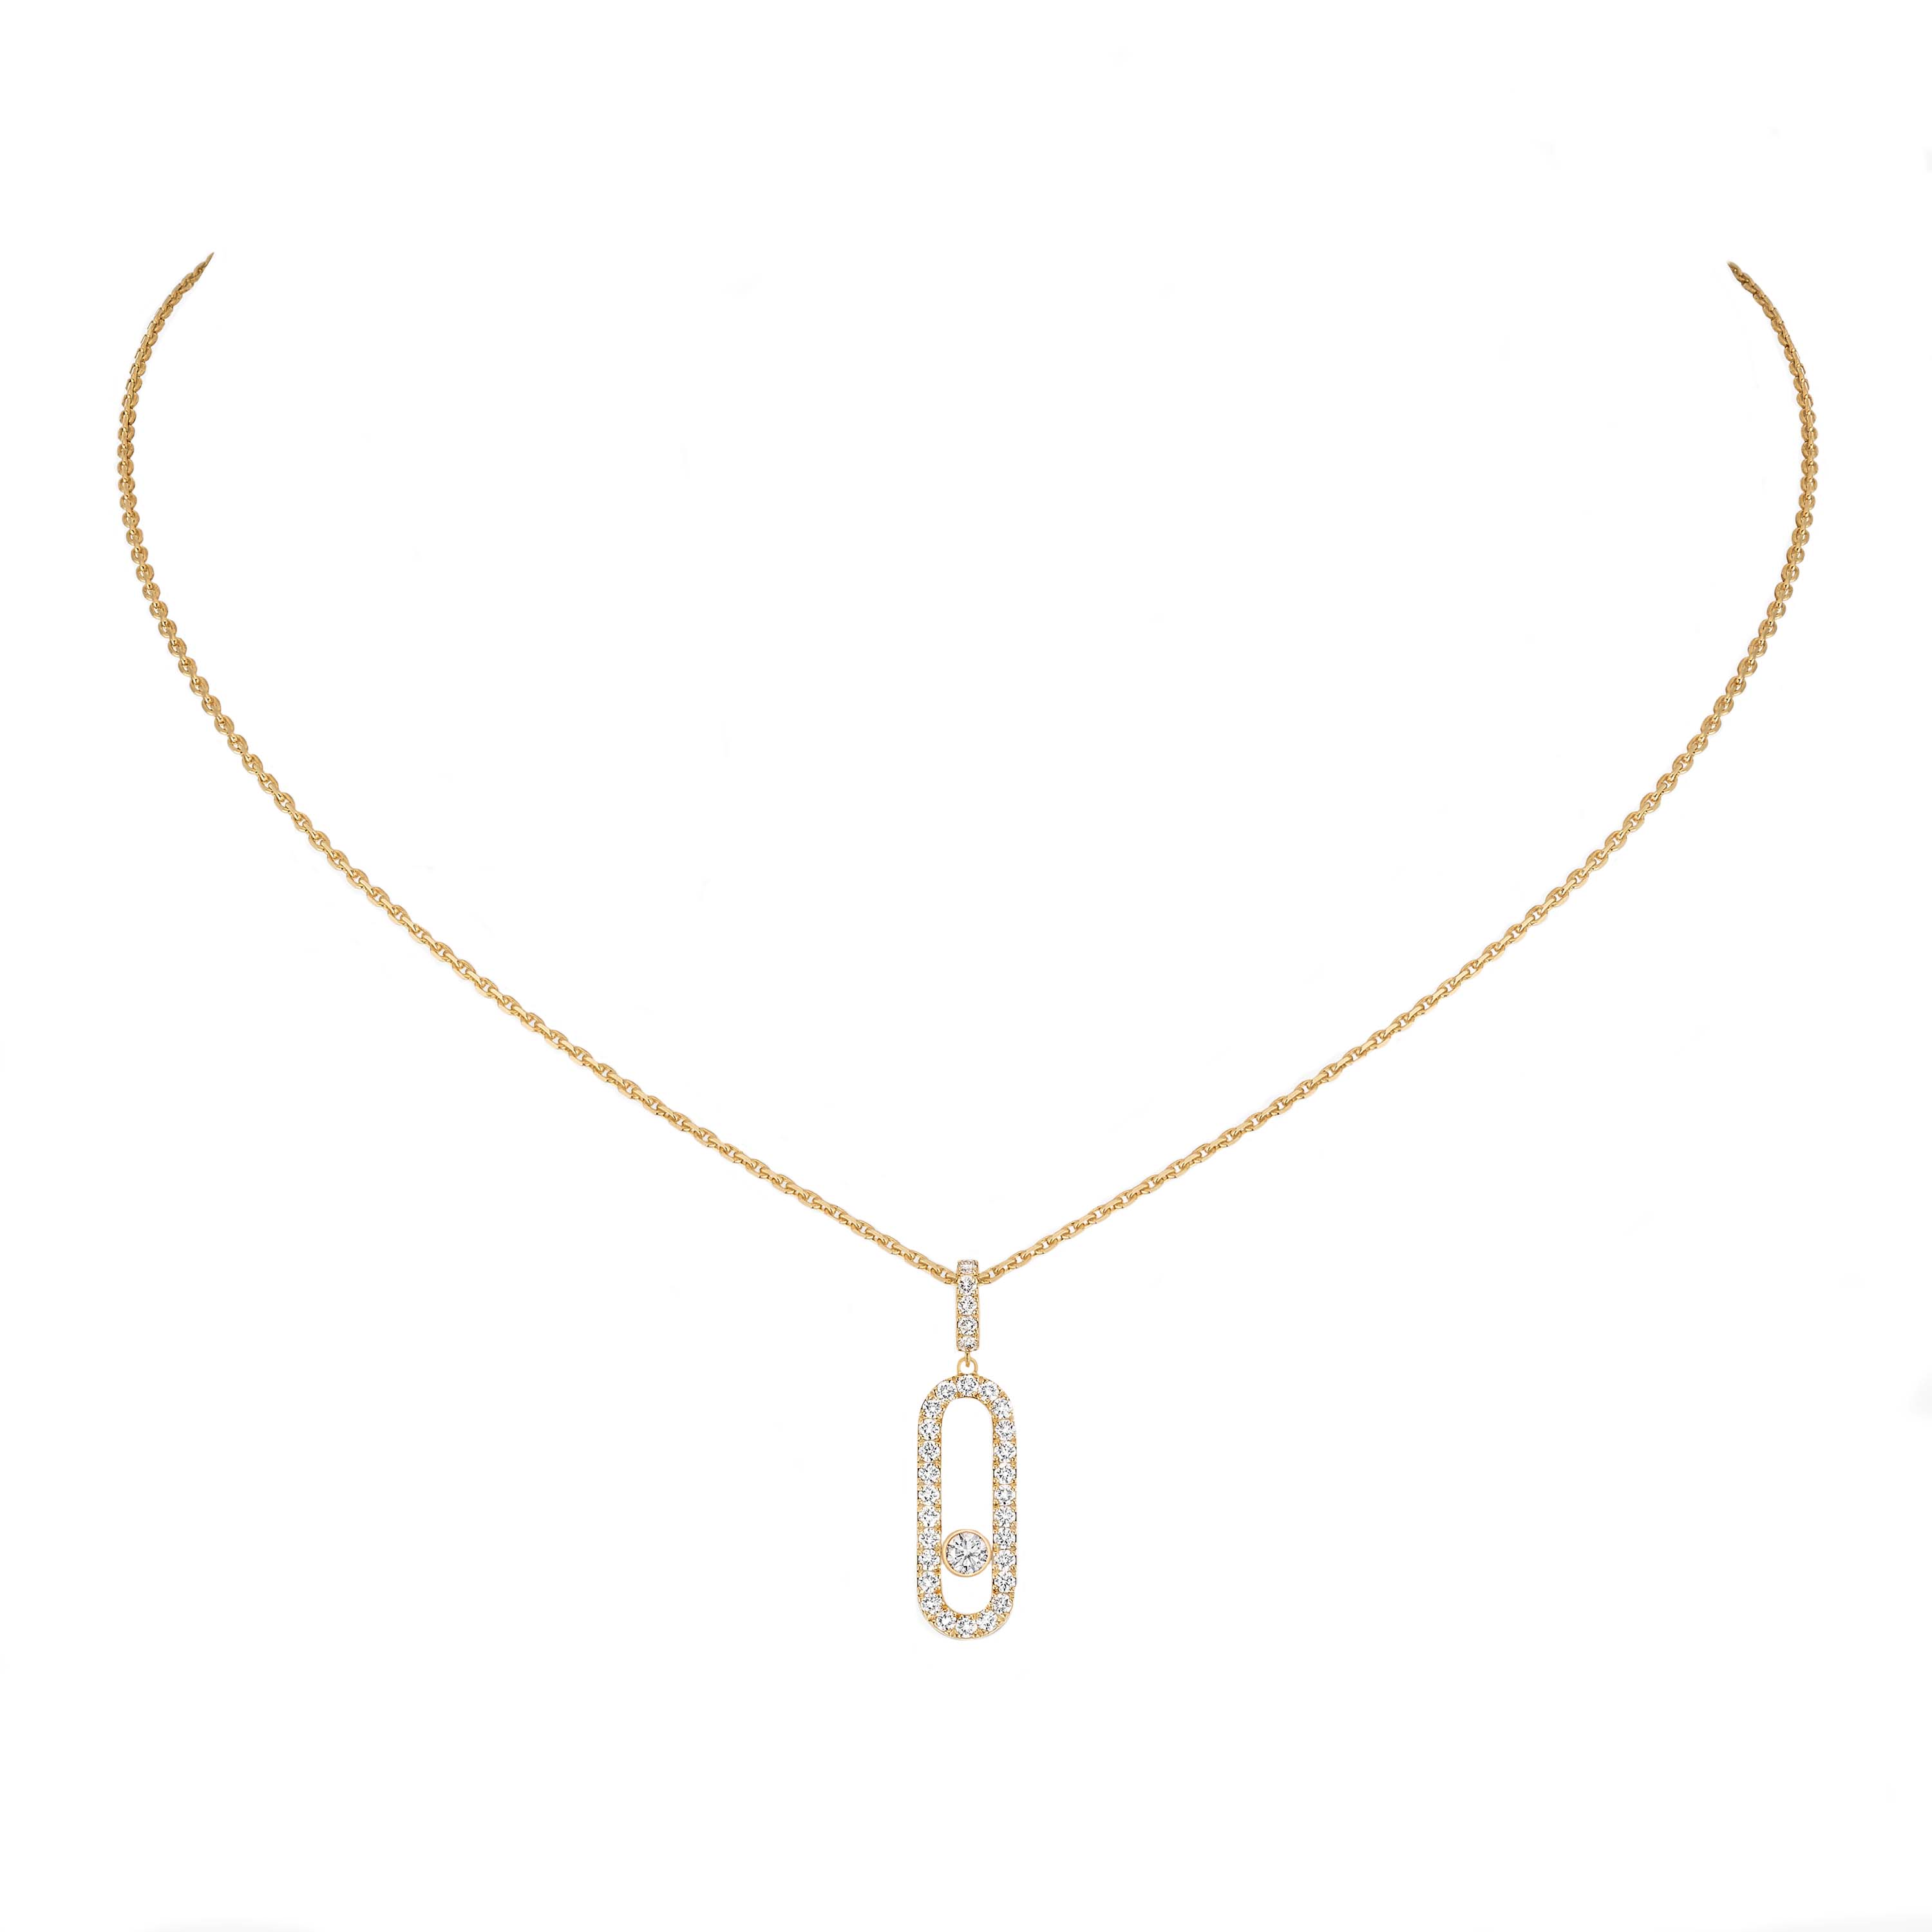 Messika Move Uno Pave 18ct Yellow Gold Diamond Necklace | C W Sellors ...